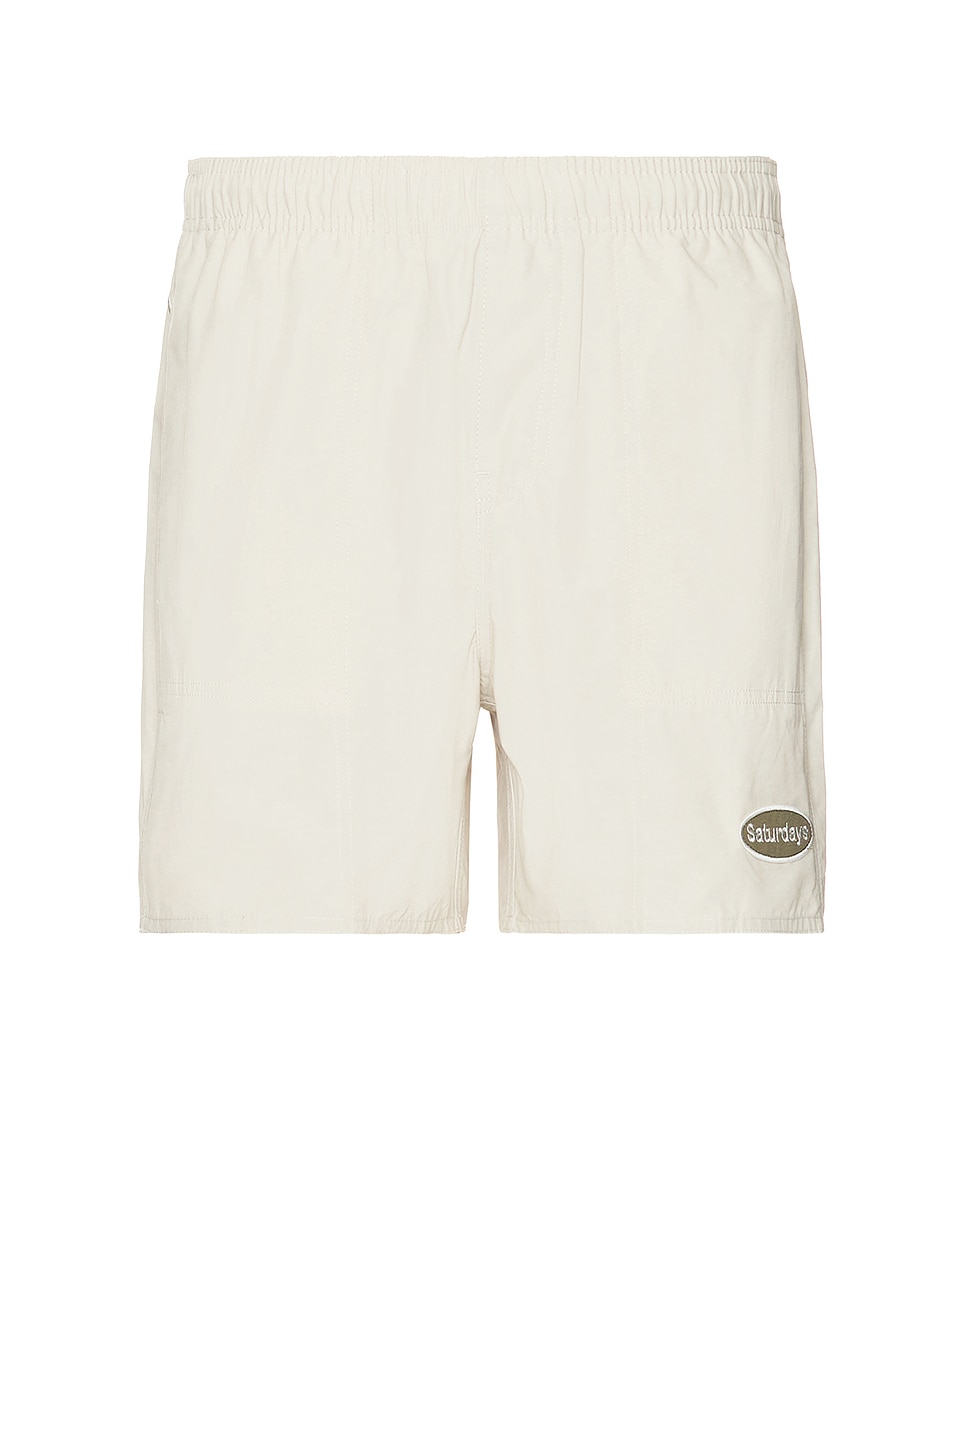 Image 1 of SATURDAYS NYC Talley Patch Logo Swim Short in Pumice Stone